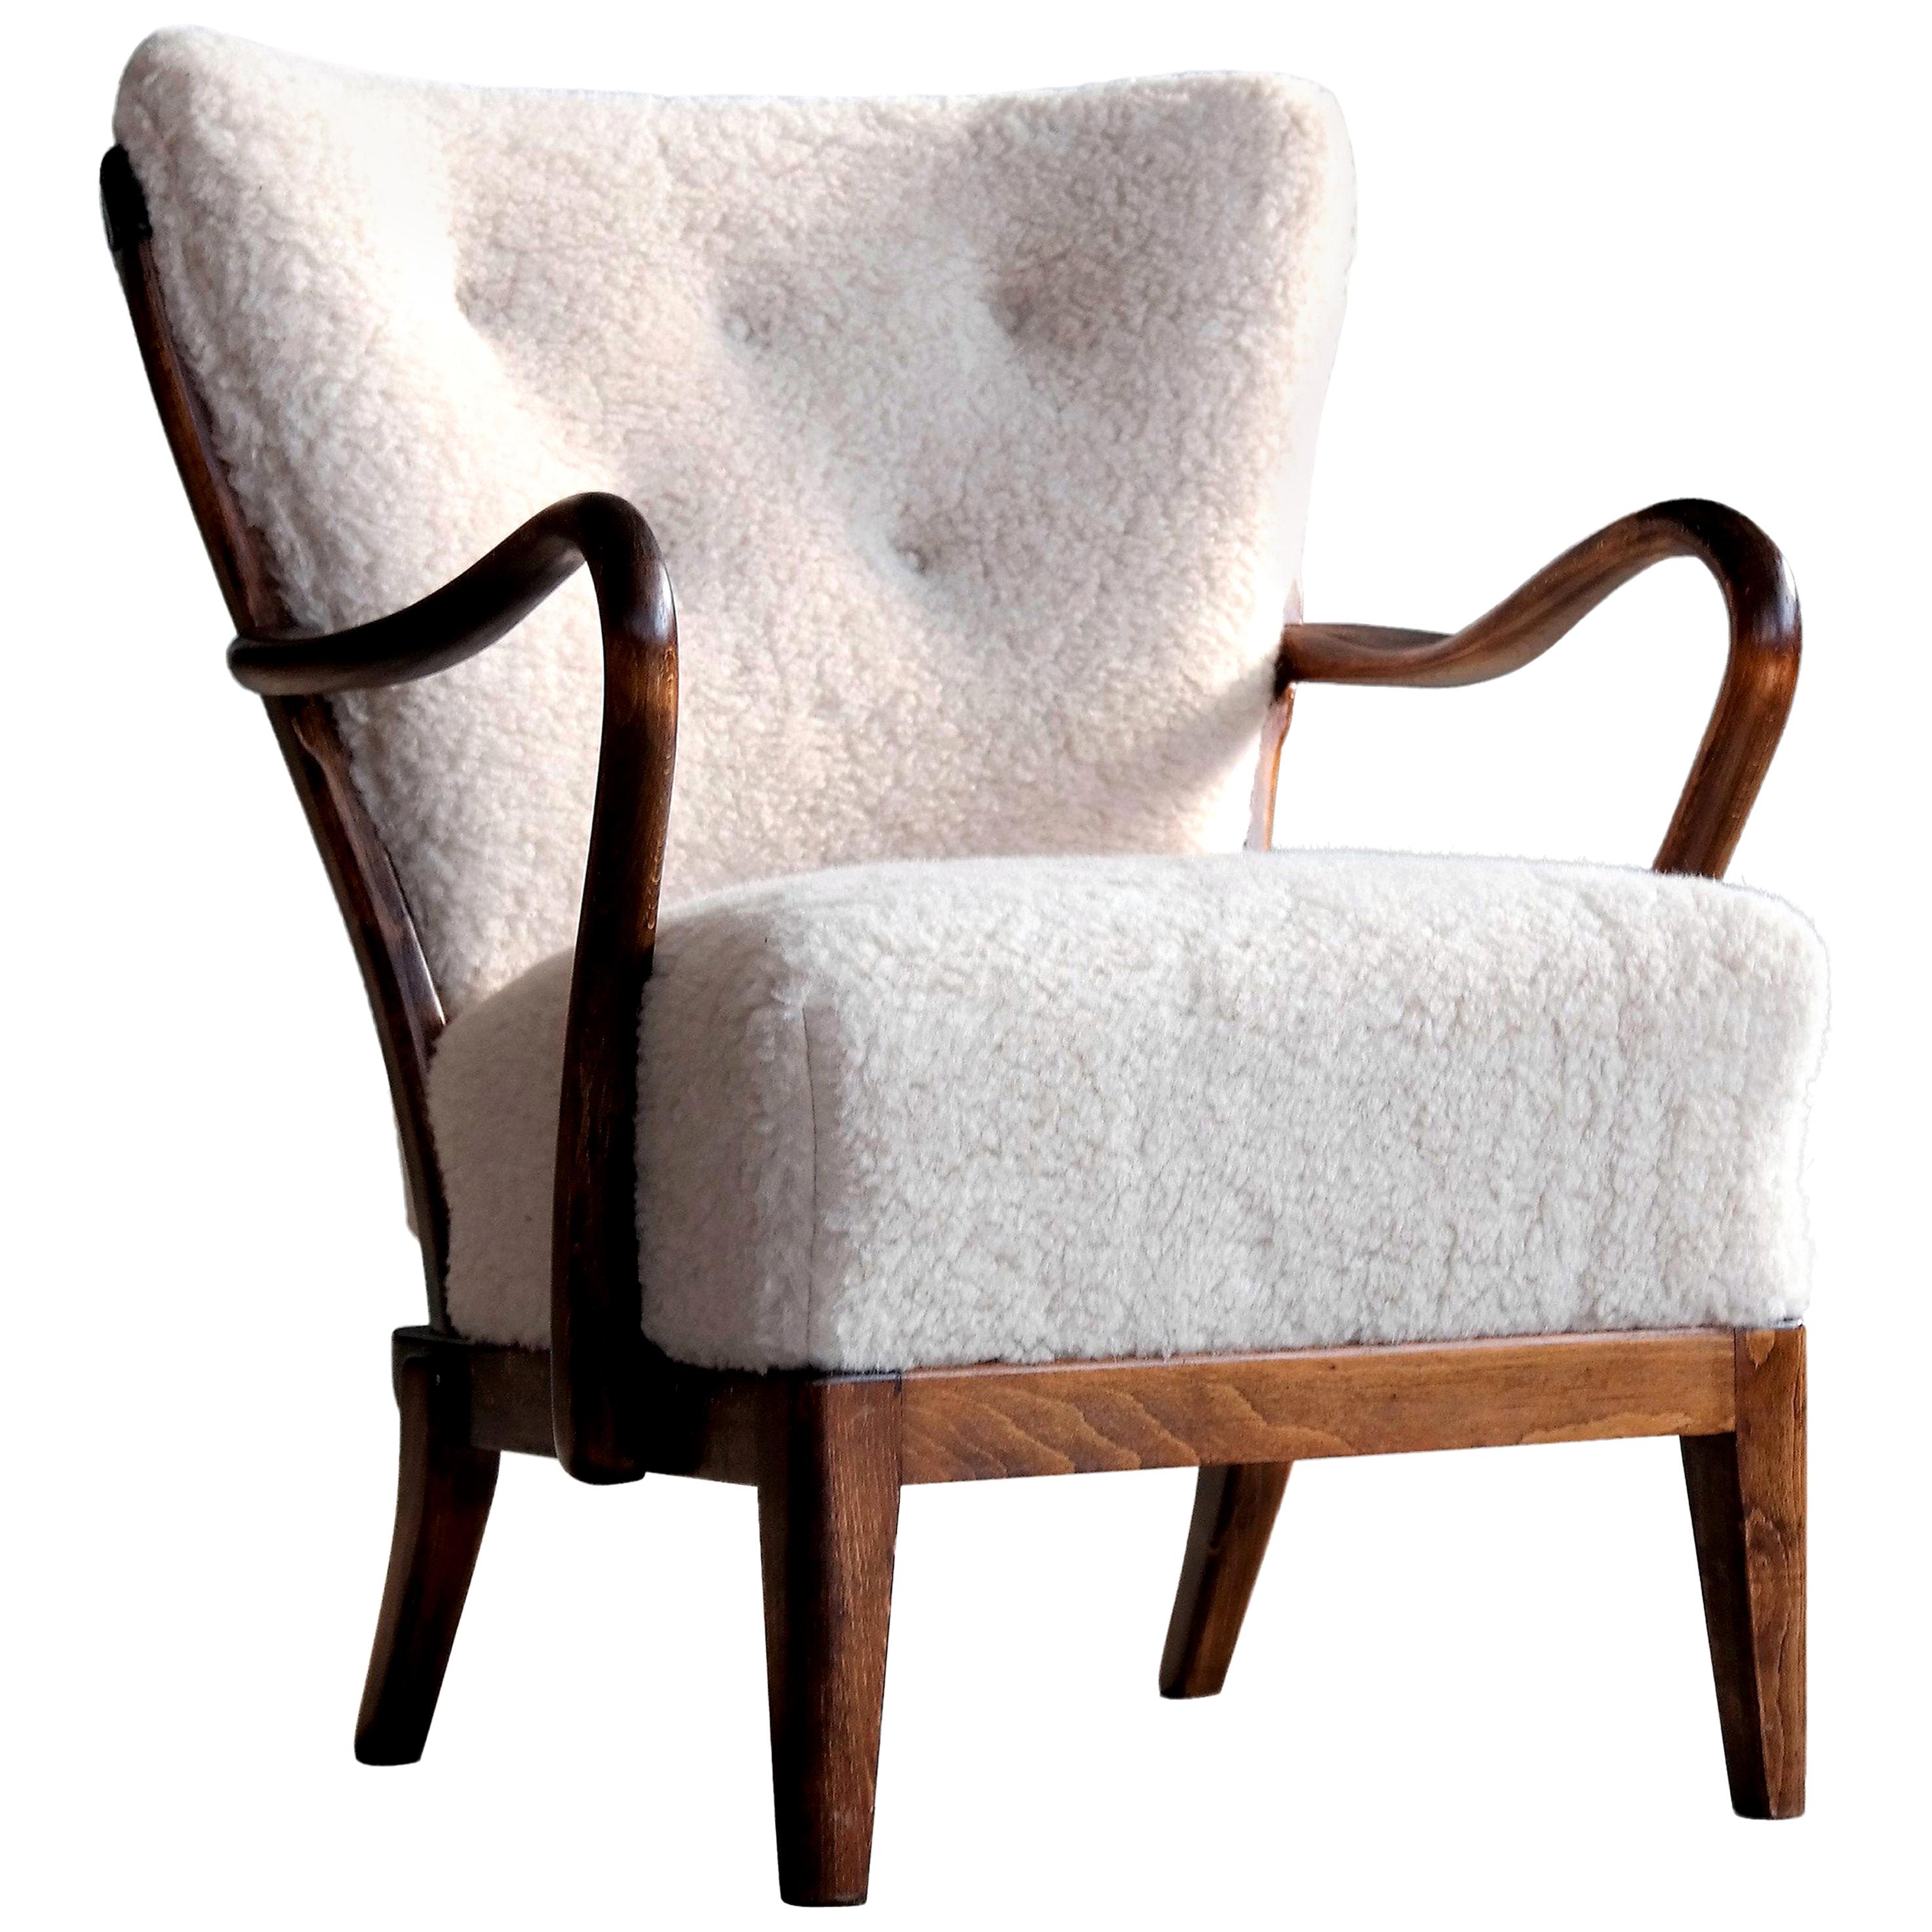 Danish 1940s Spindleback Lounge Chair in Lambswool by Alfred Christensen